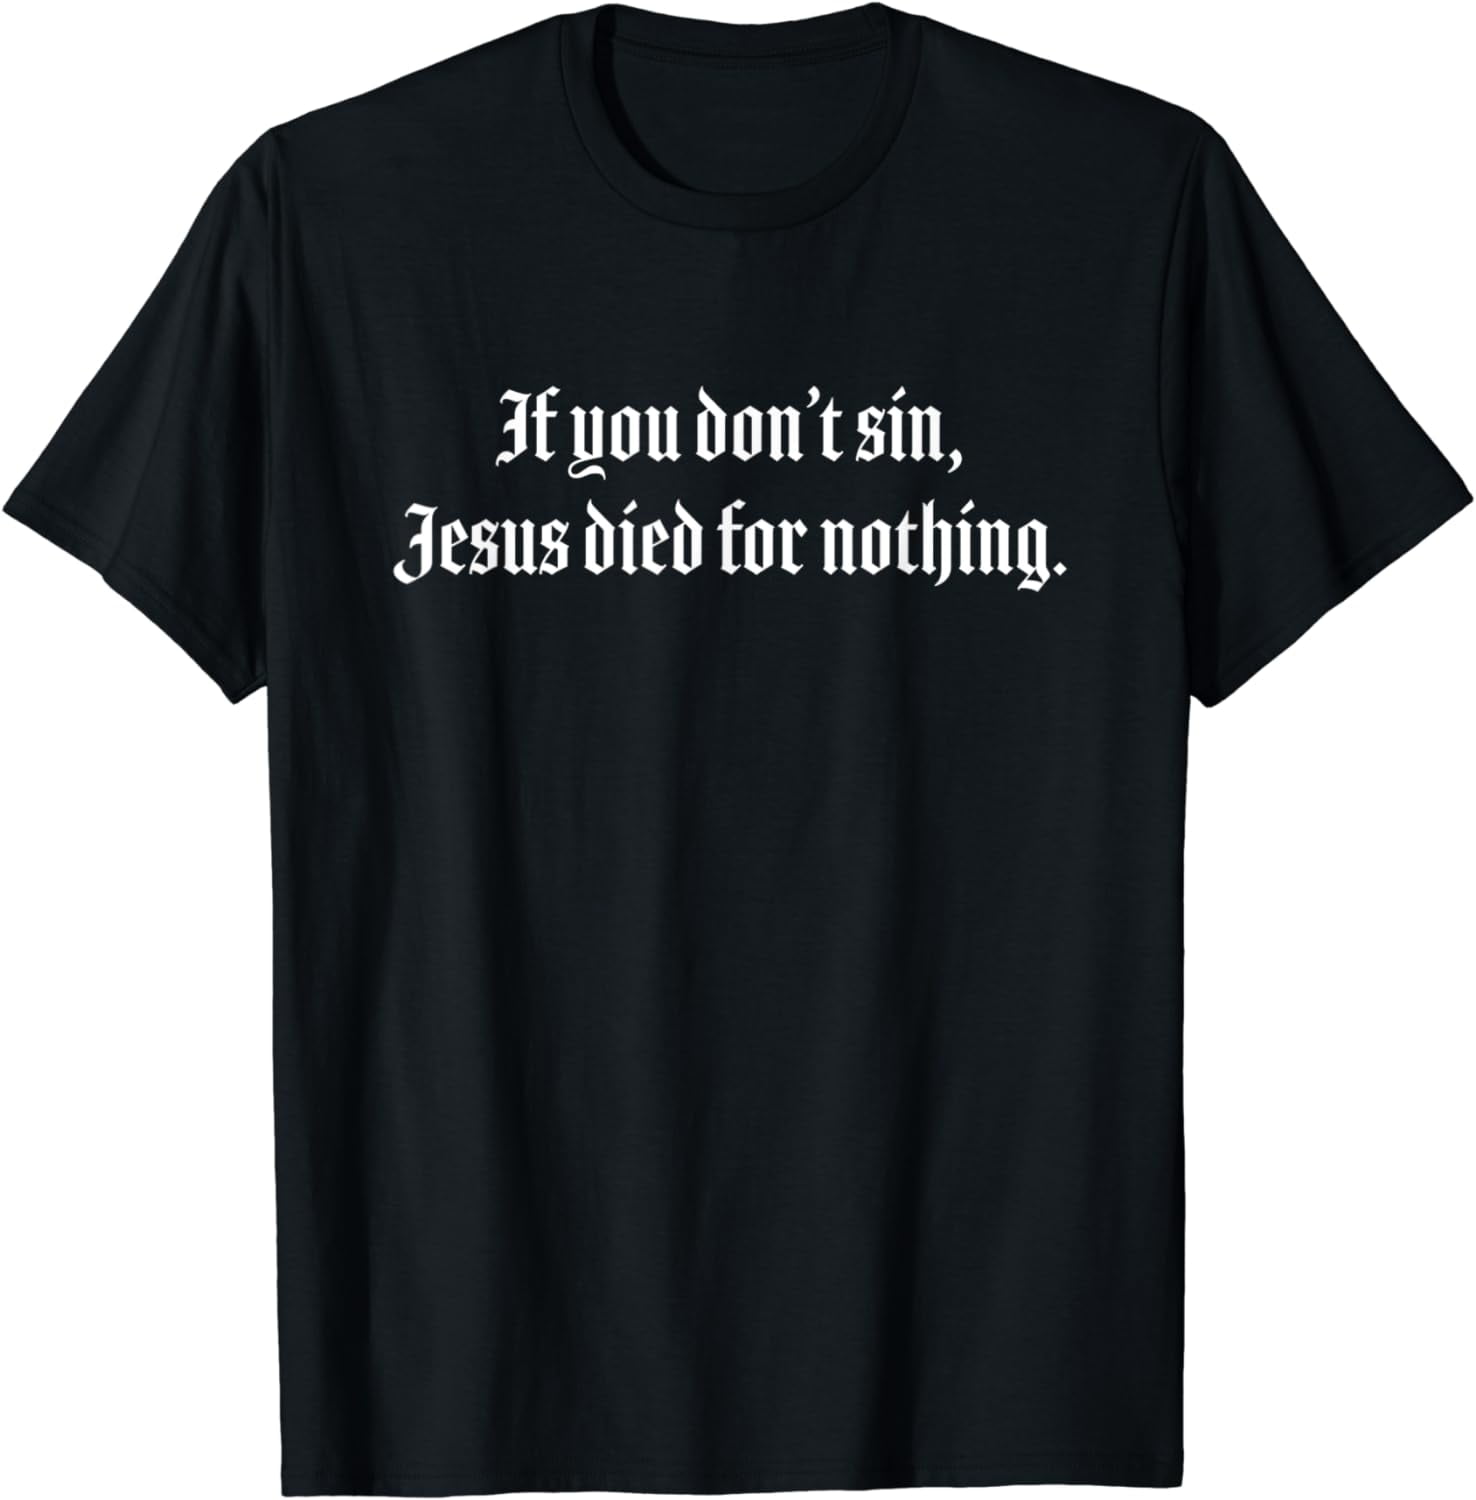 If You Don't Sin Jesus Died For Nothing Atheist Pagan Shirt - Walmart.com